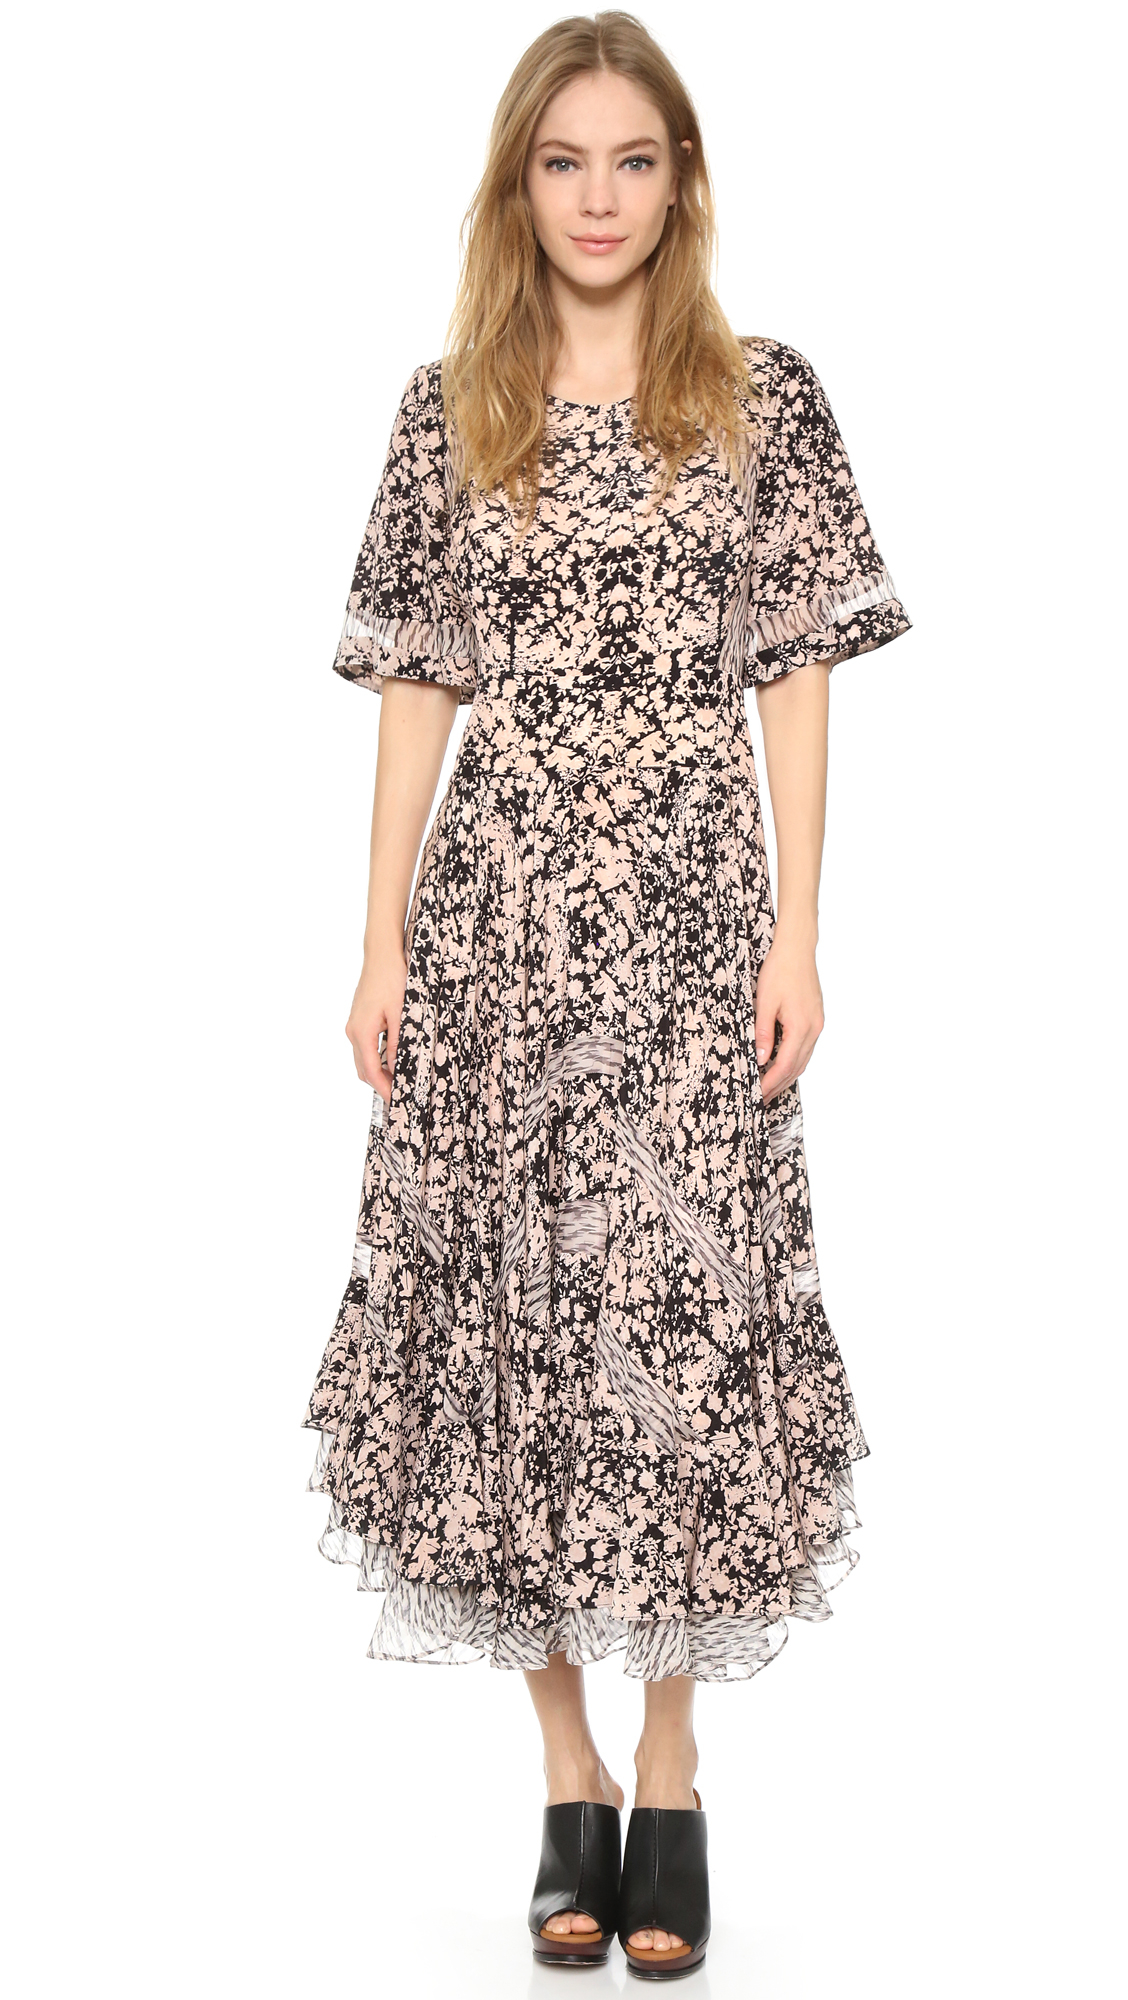 Lyst - Rebecca Taylor Mixed Print Dress in White